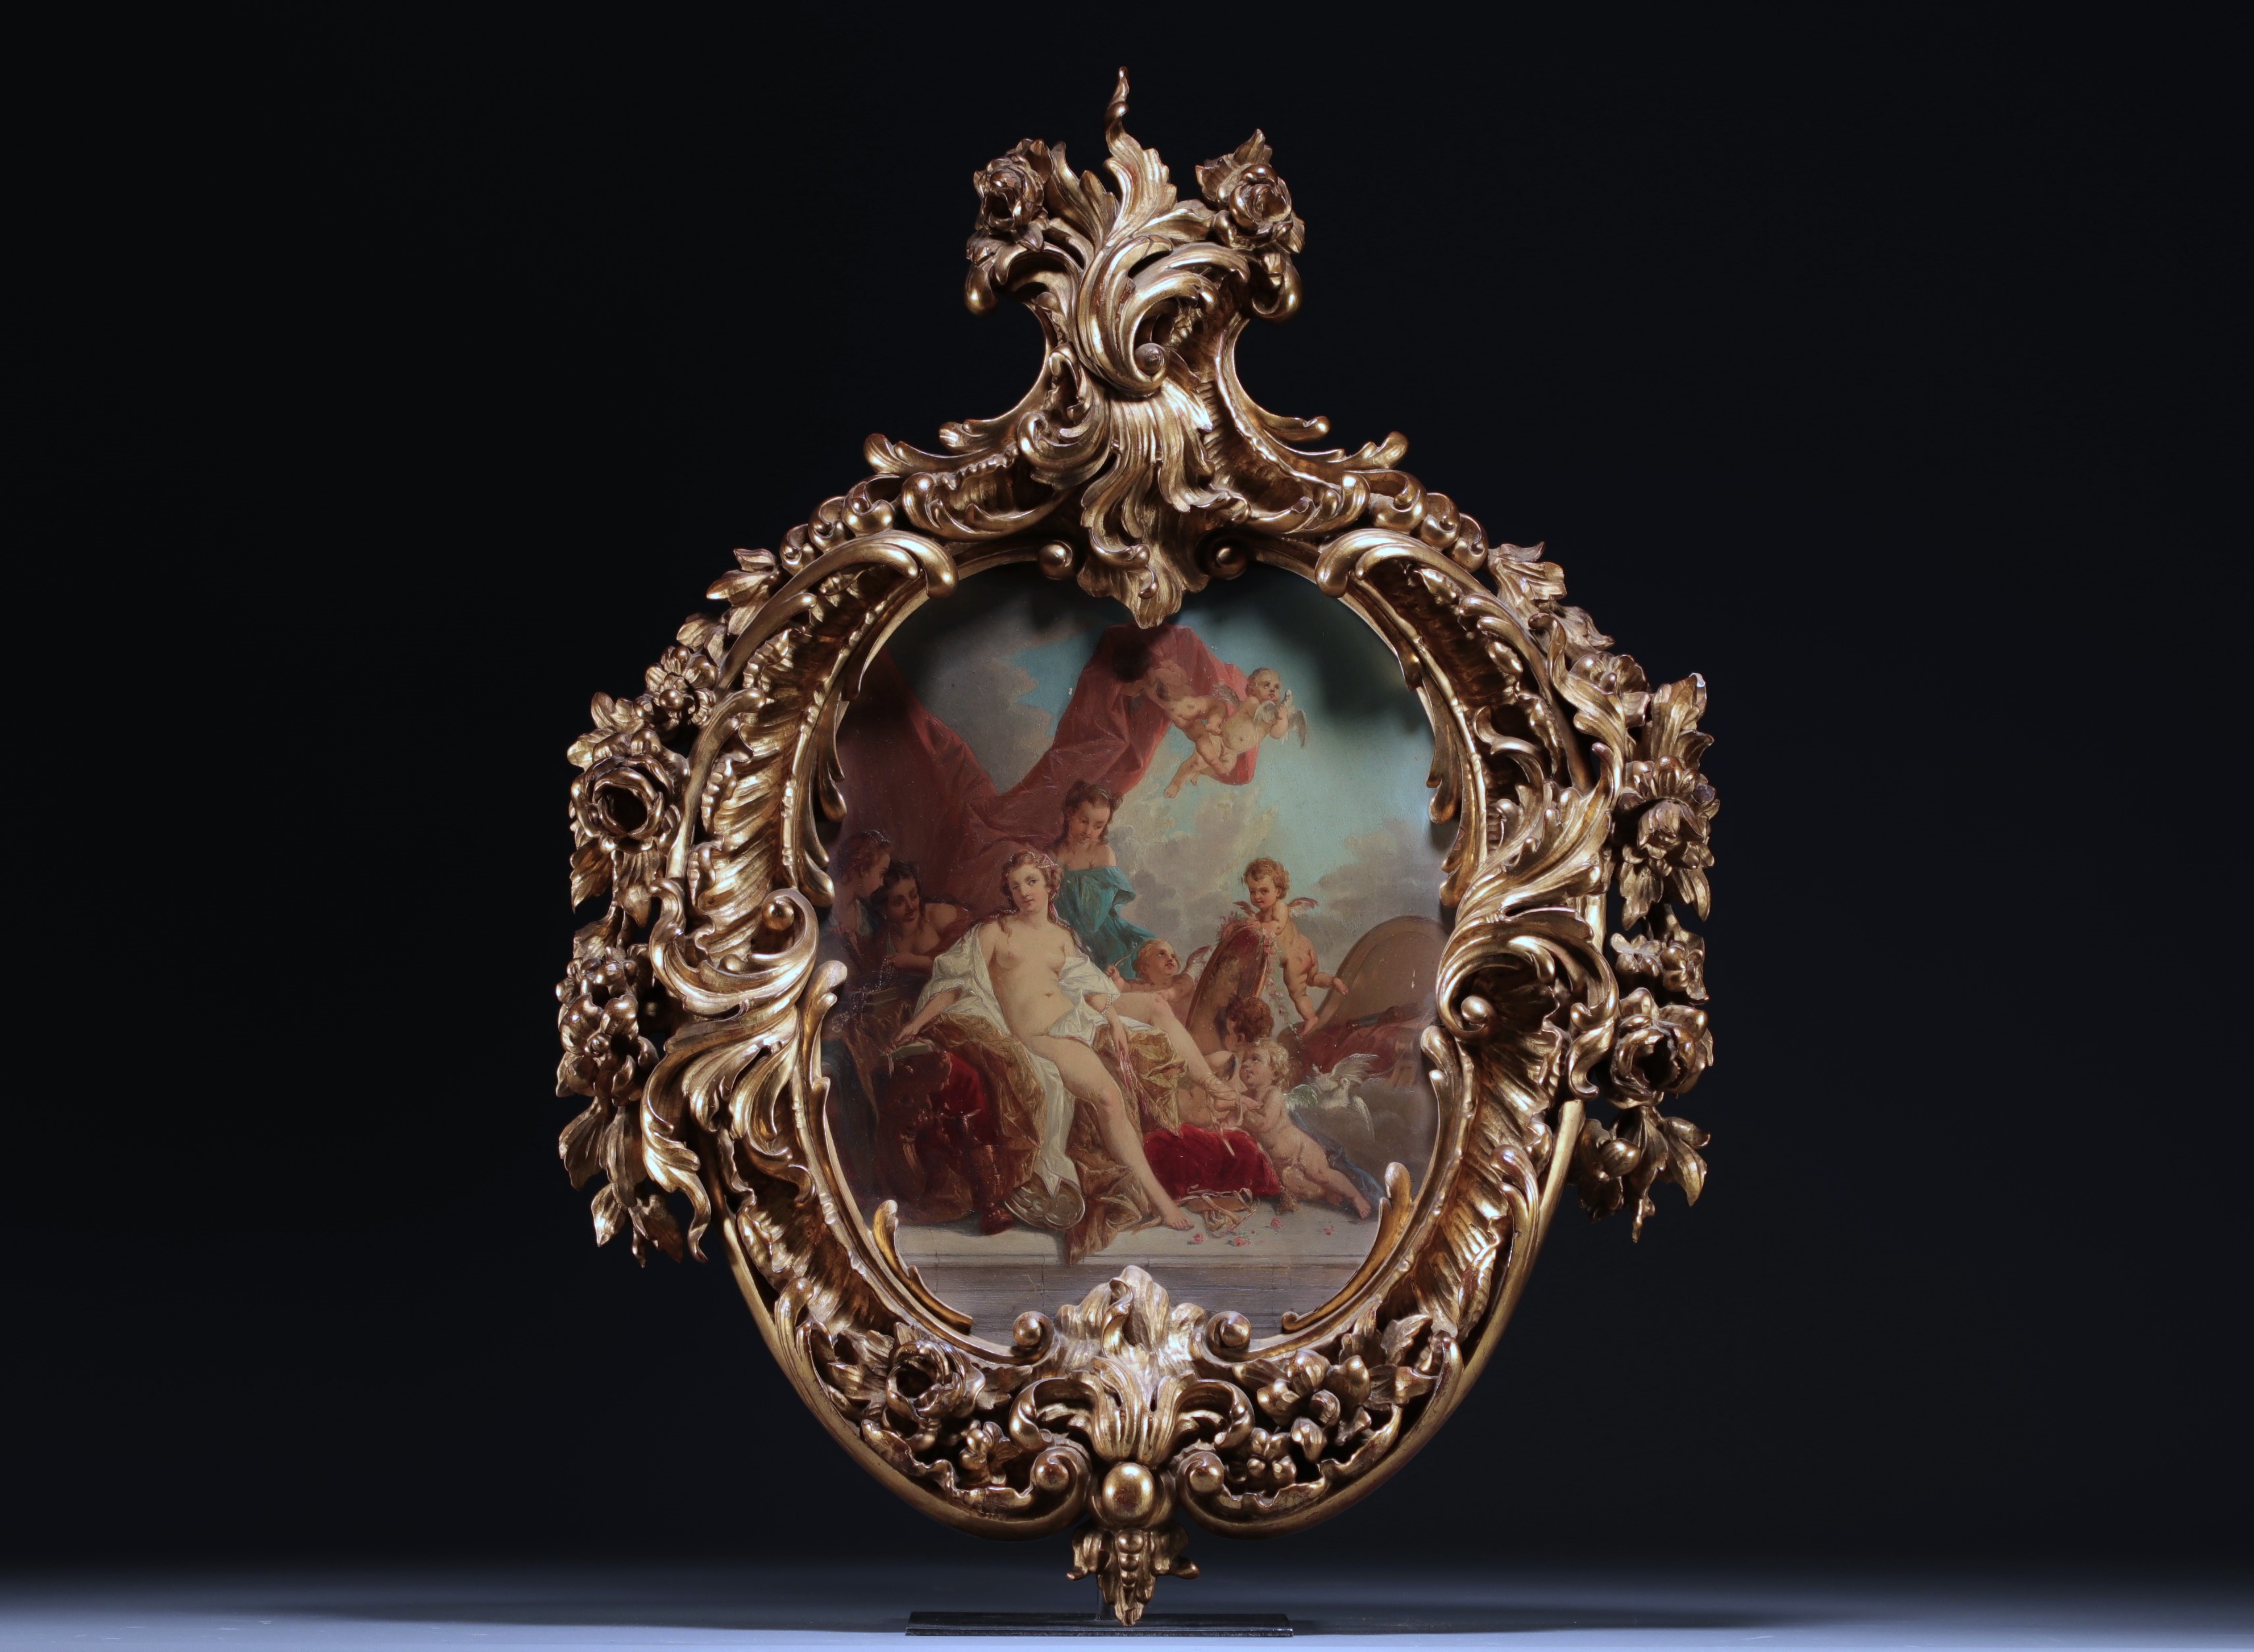 Francois BOUCHER (1703-1770) after. "Oil on copper, 19th century.